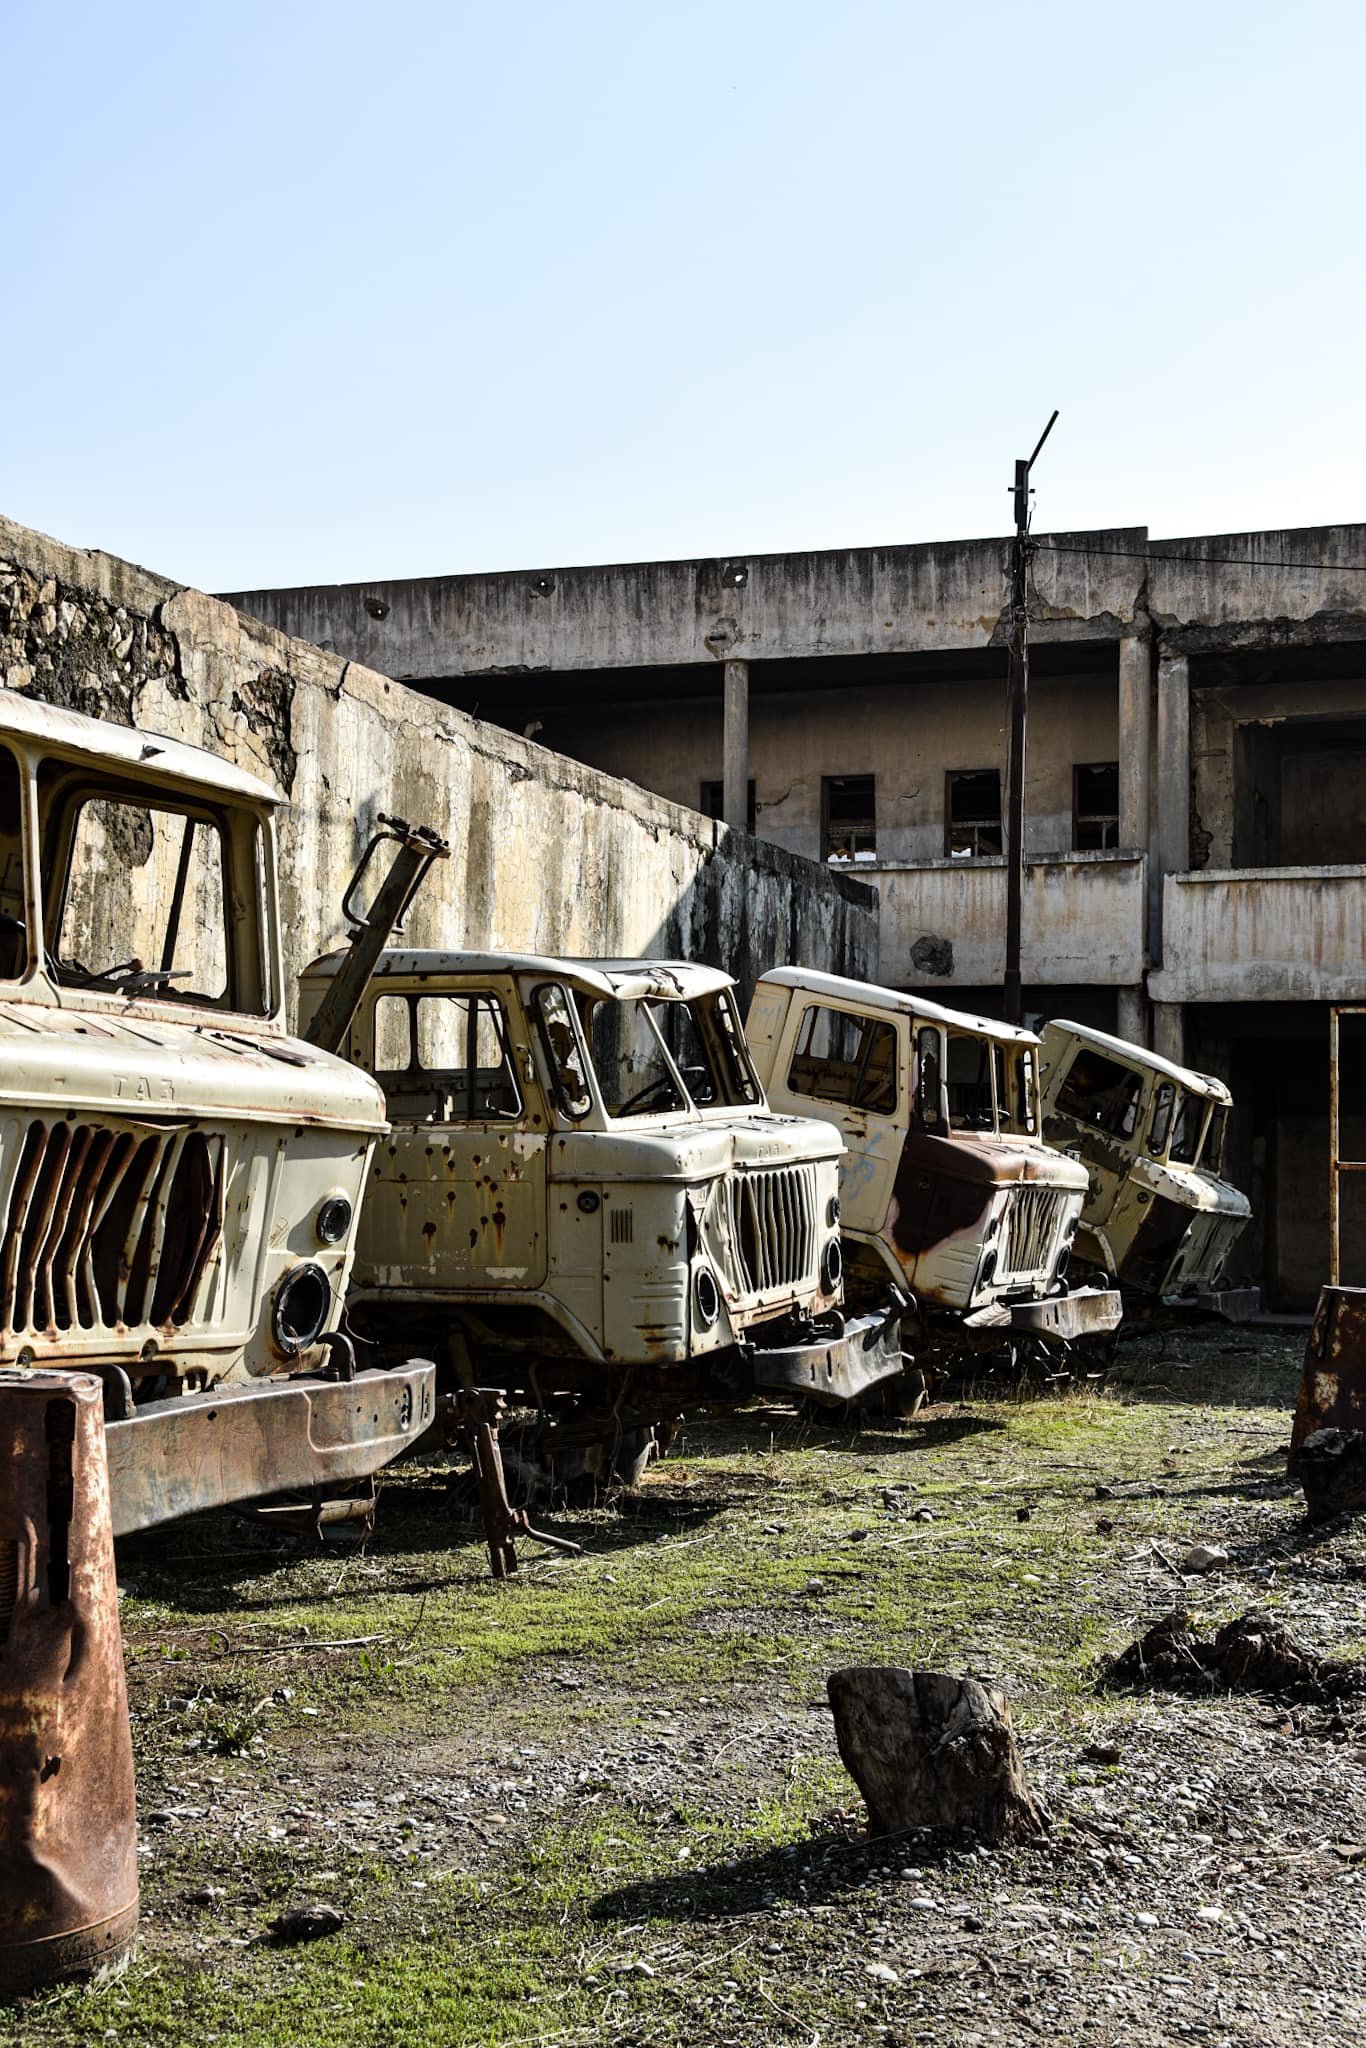 old Soviet military trucks in an abandoned Iraqi prison